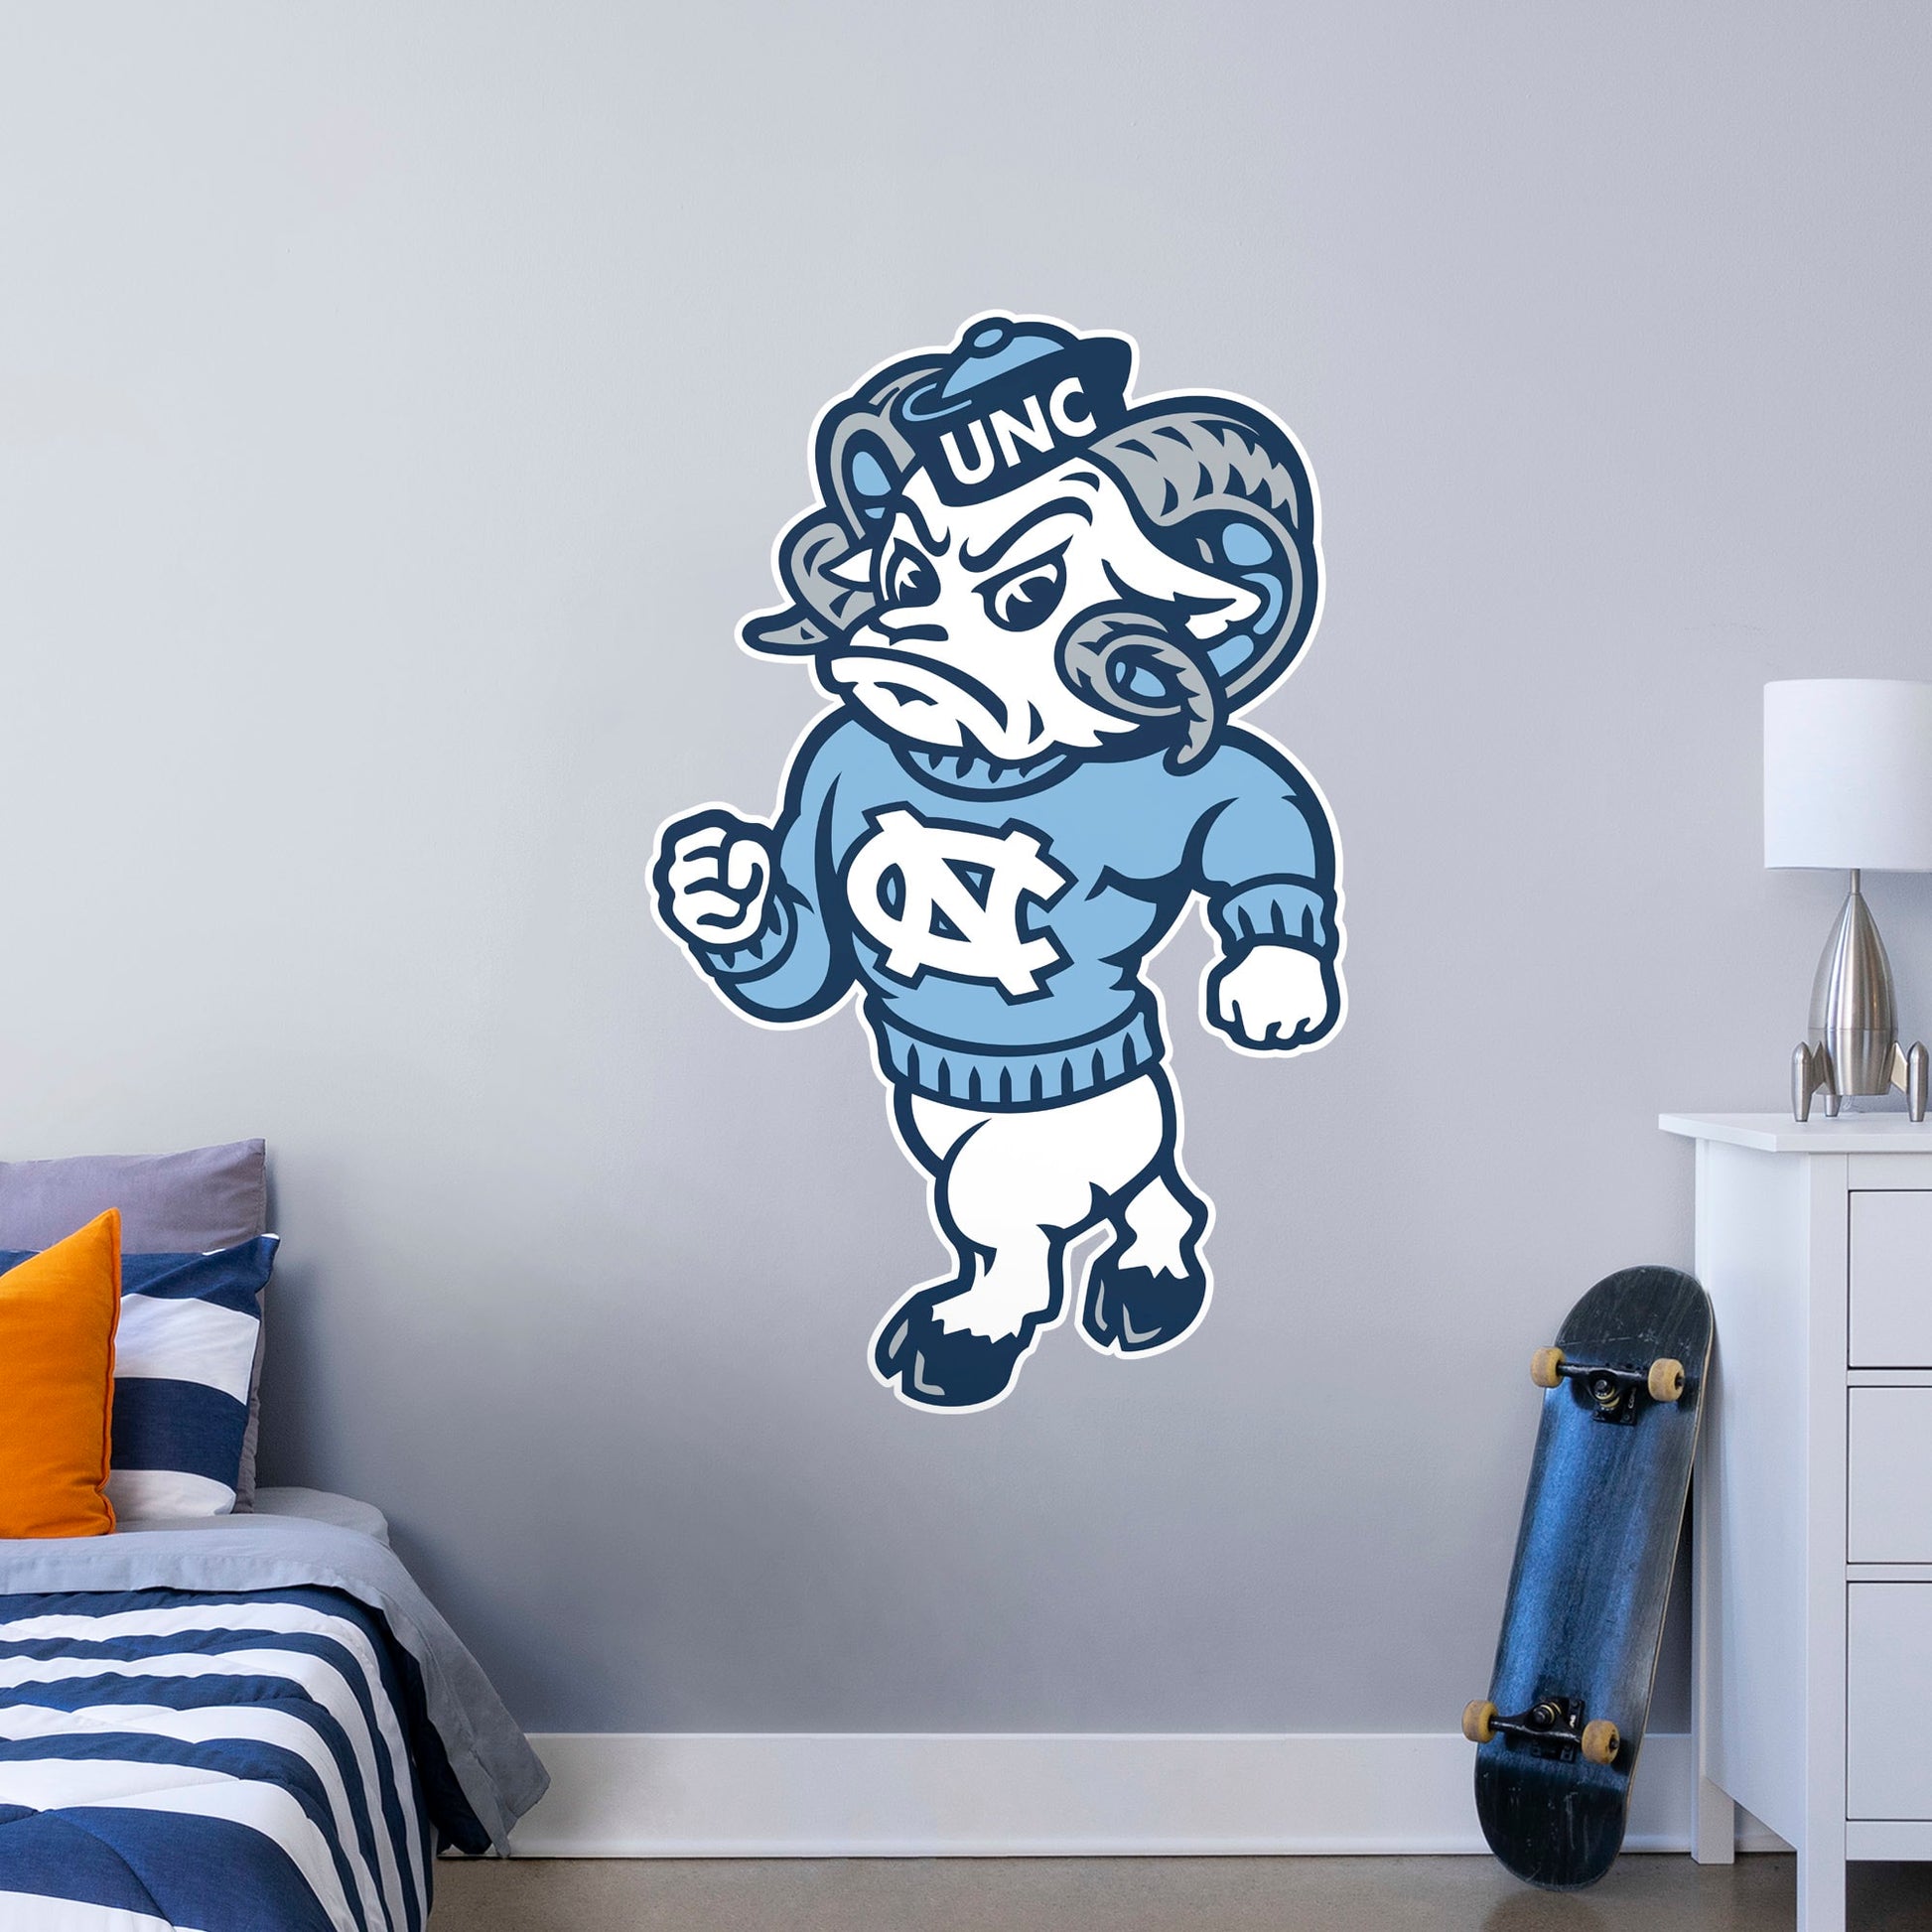 Giant Mascot + 2 Decals (33"W x 51"H)